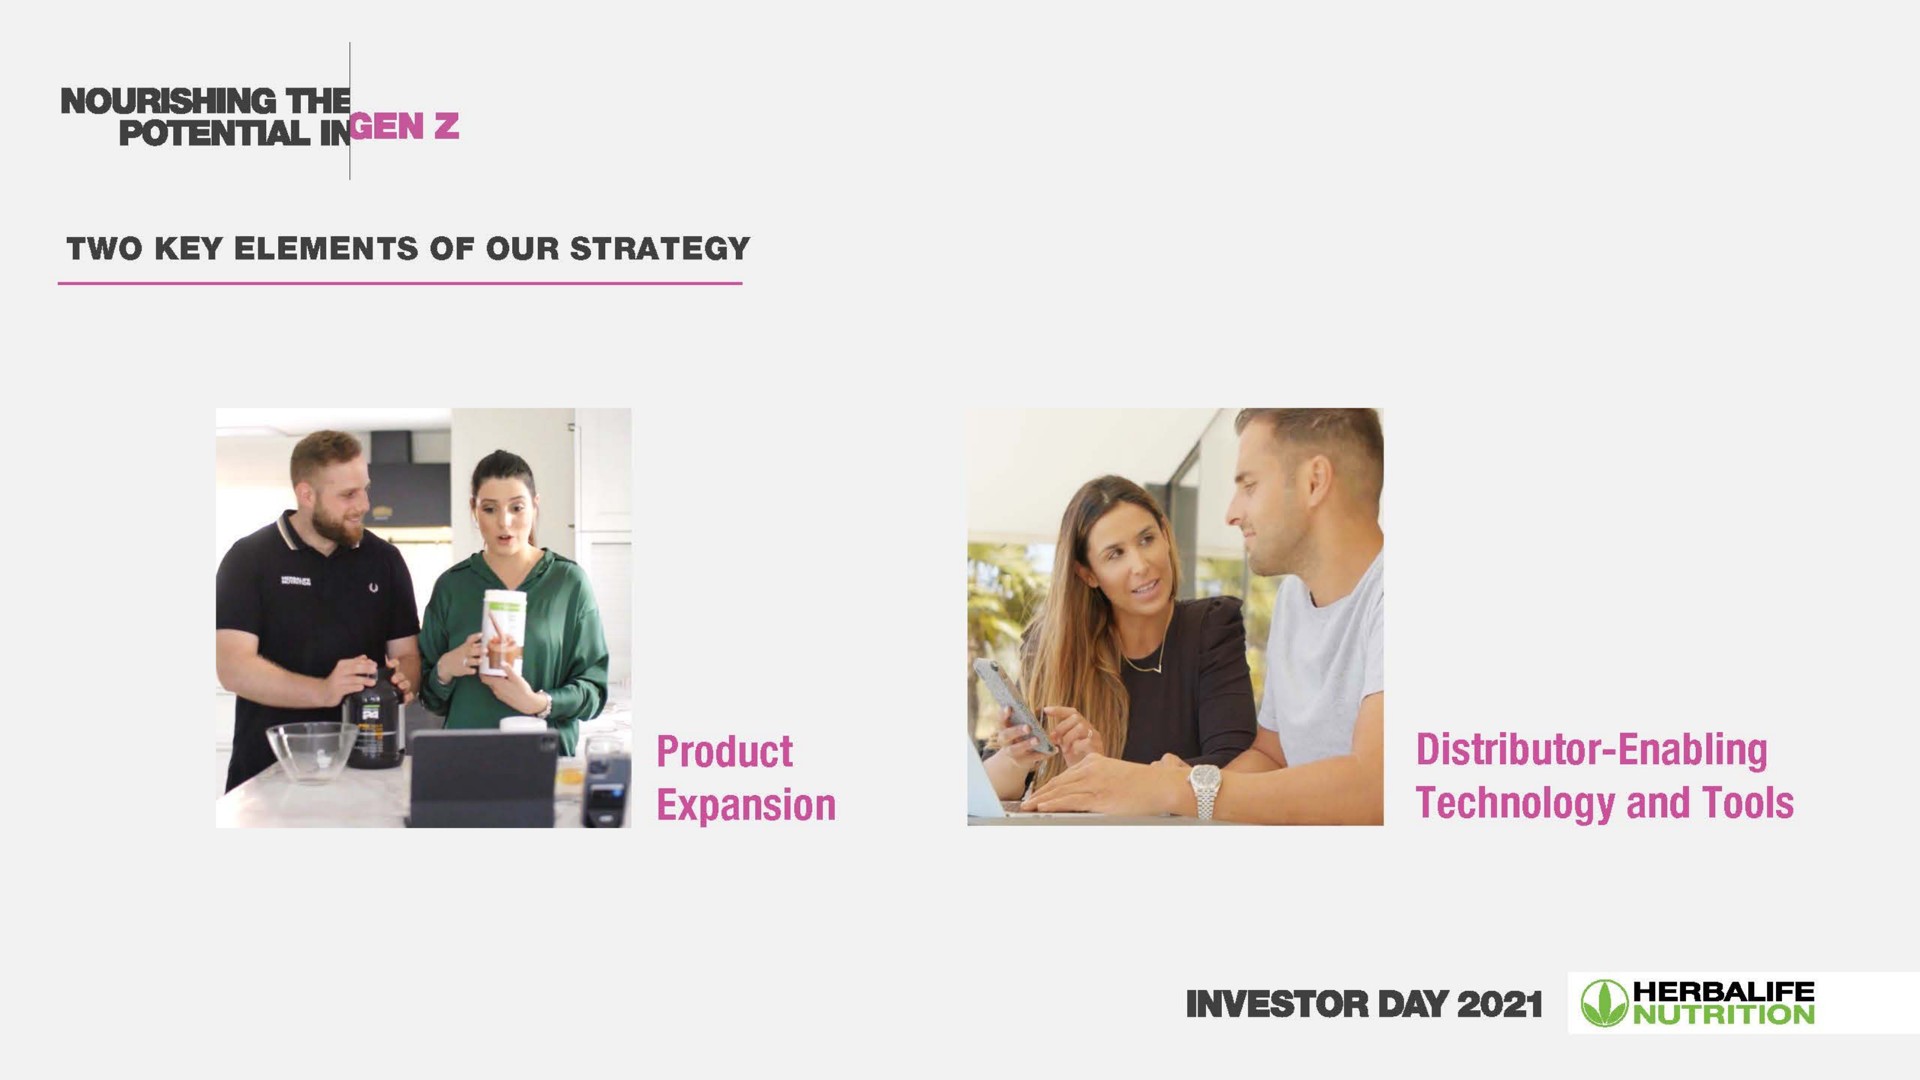 nourishing potential product expansion distributor enabling technology and tools investor day | Herbalife